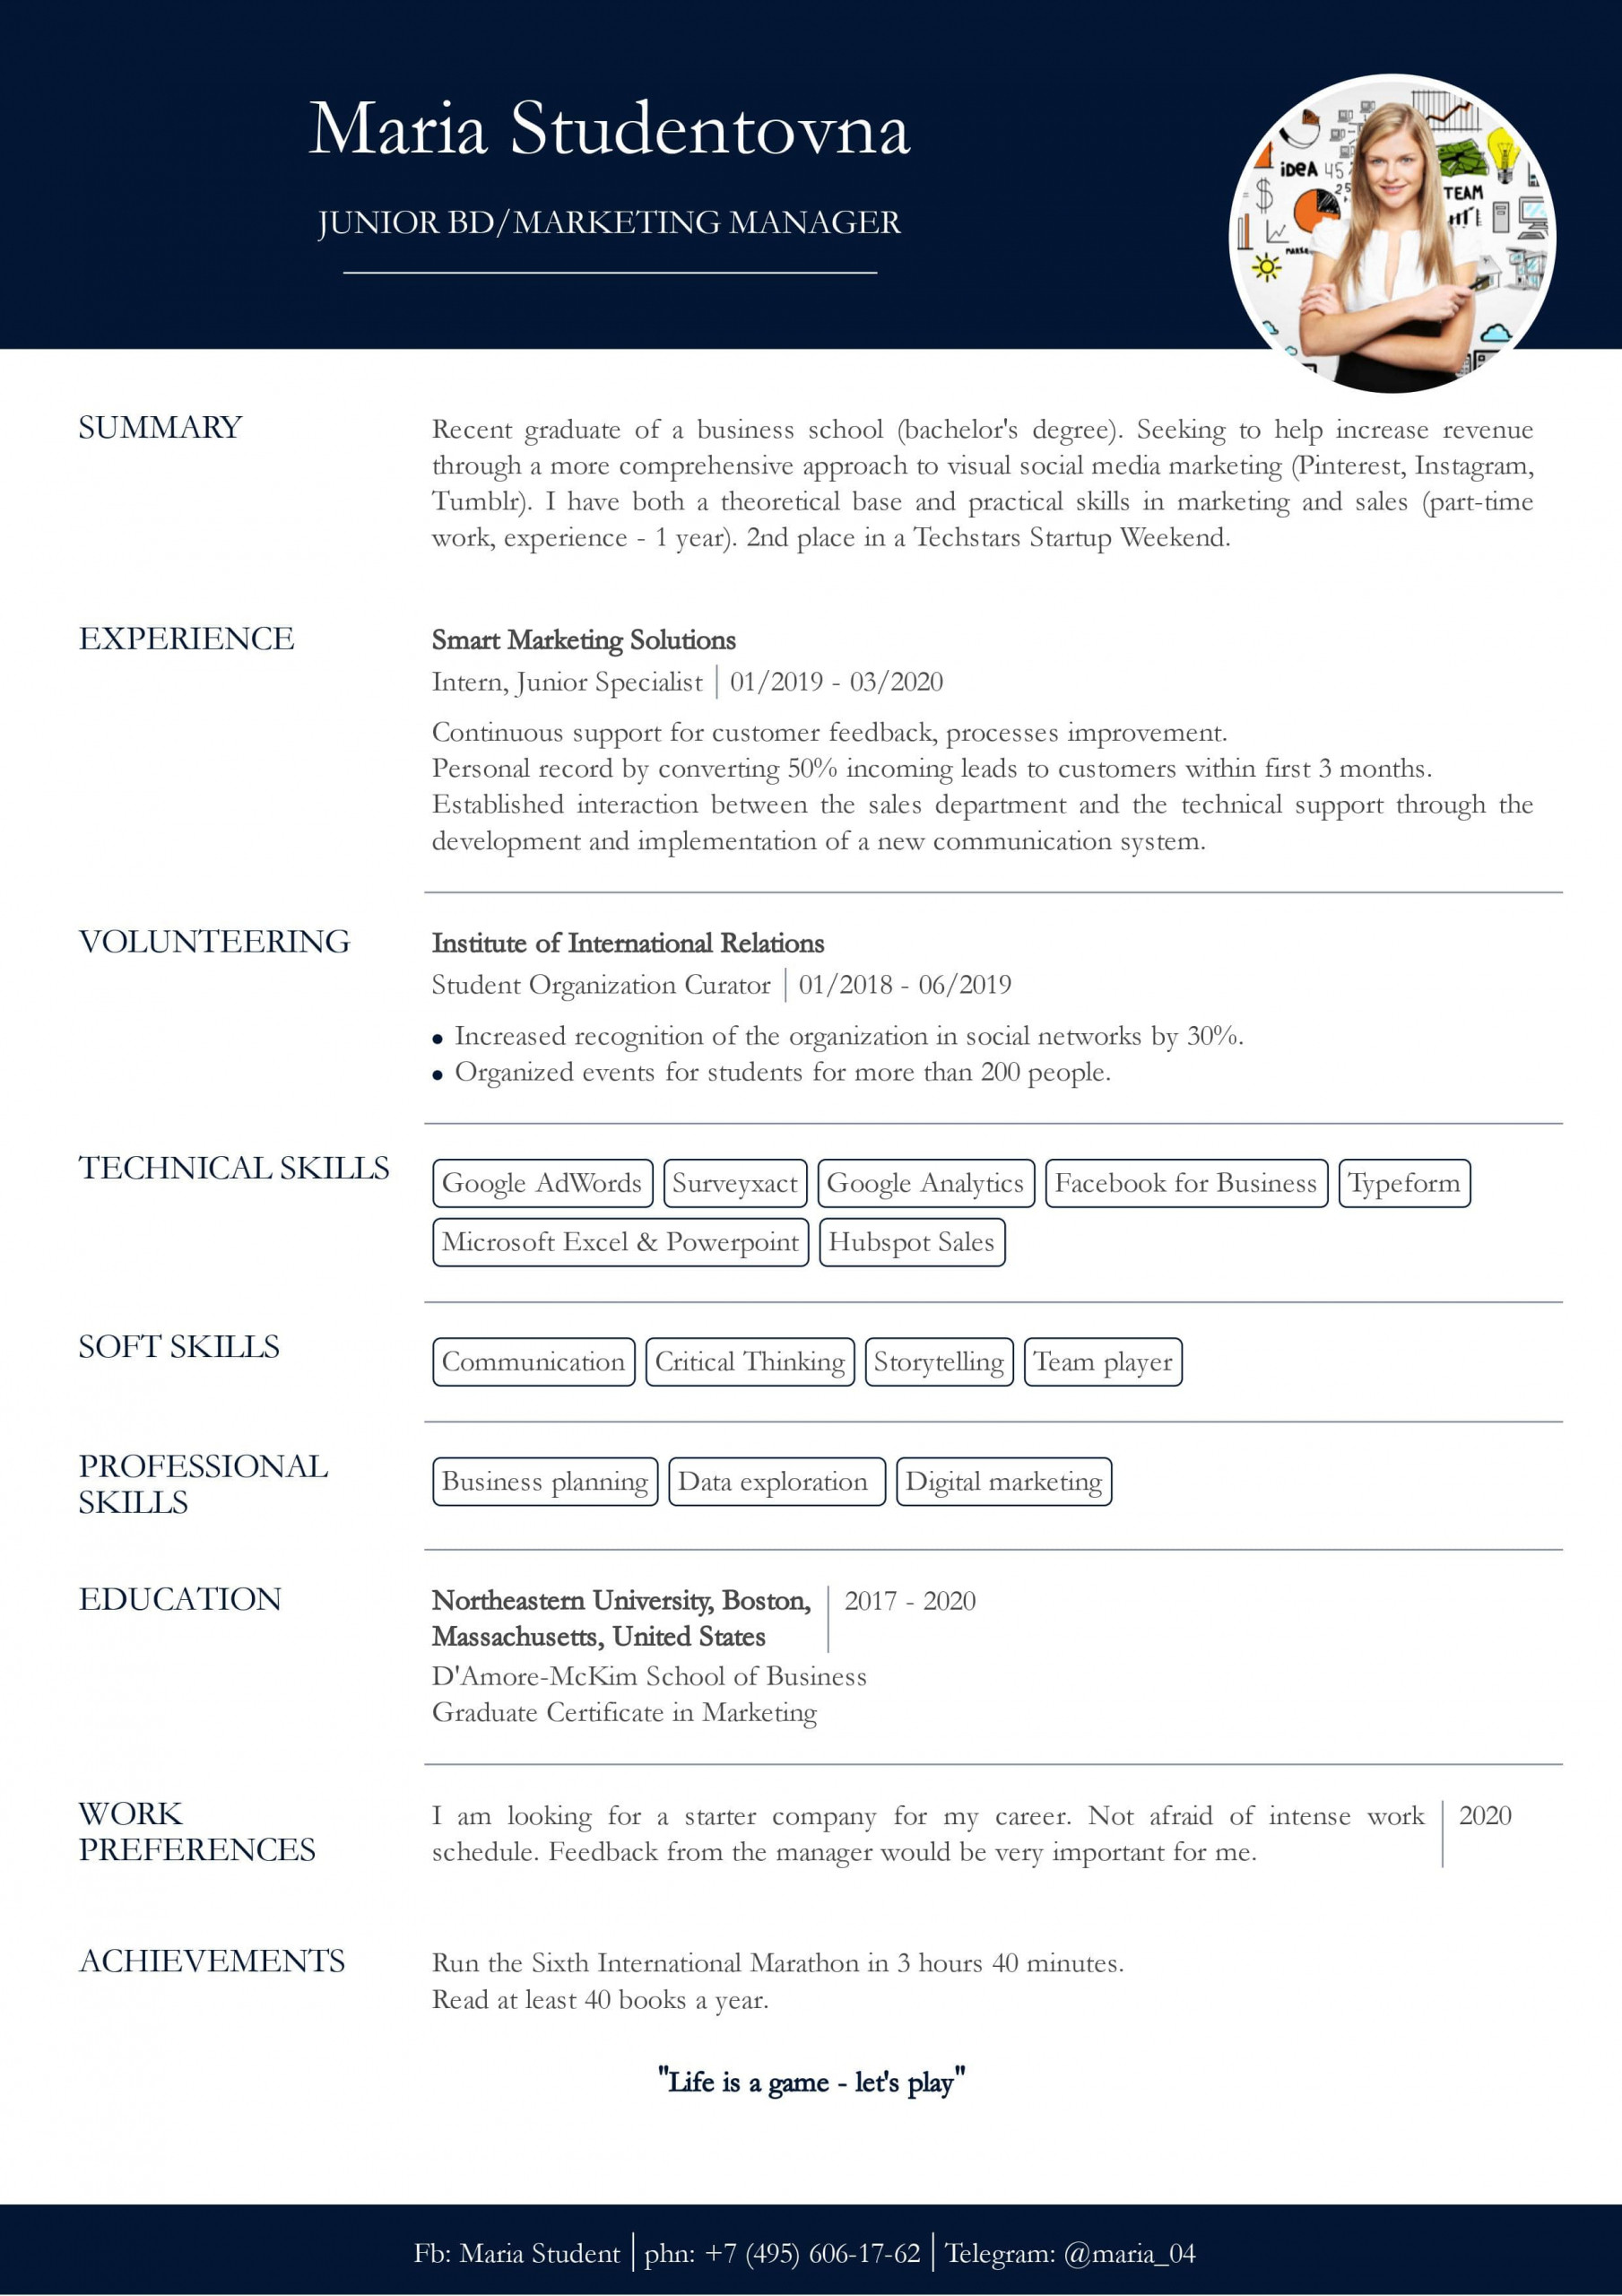 Resume Samples with Little Work History Resume with No Work Experience. Sample for Students. – Cv2you Blog